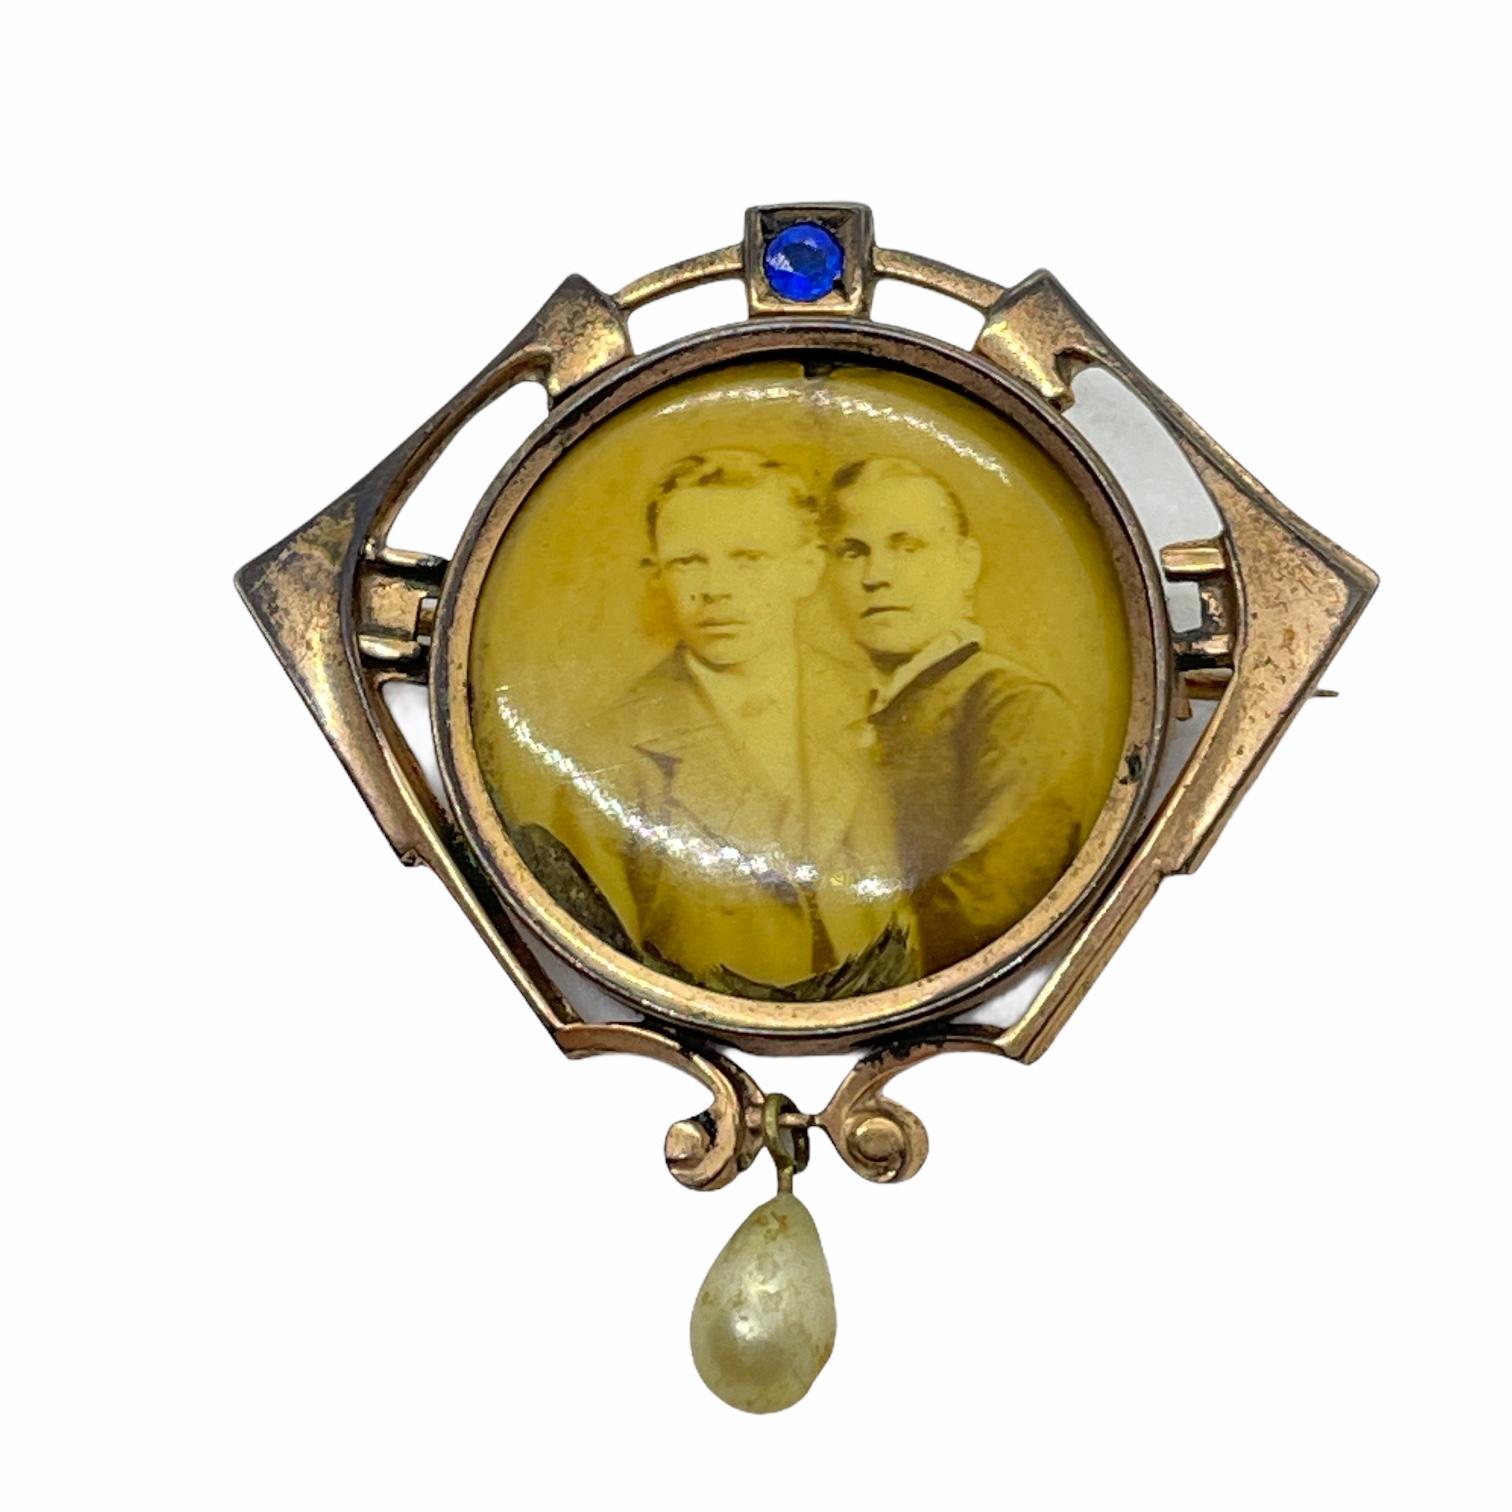 This lovely stylish sentimental brooch was made to keep a photo of loved ones. Made in Germany, circa 1900. The brooch has a picture inside. It has a blue stone and also has a hanging fresh water pearl on it.
A very pretty piece of antique